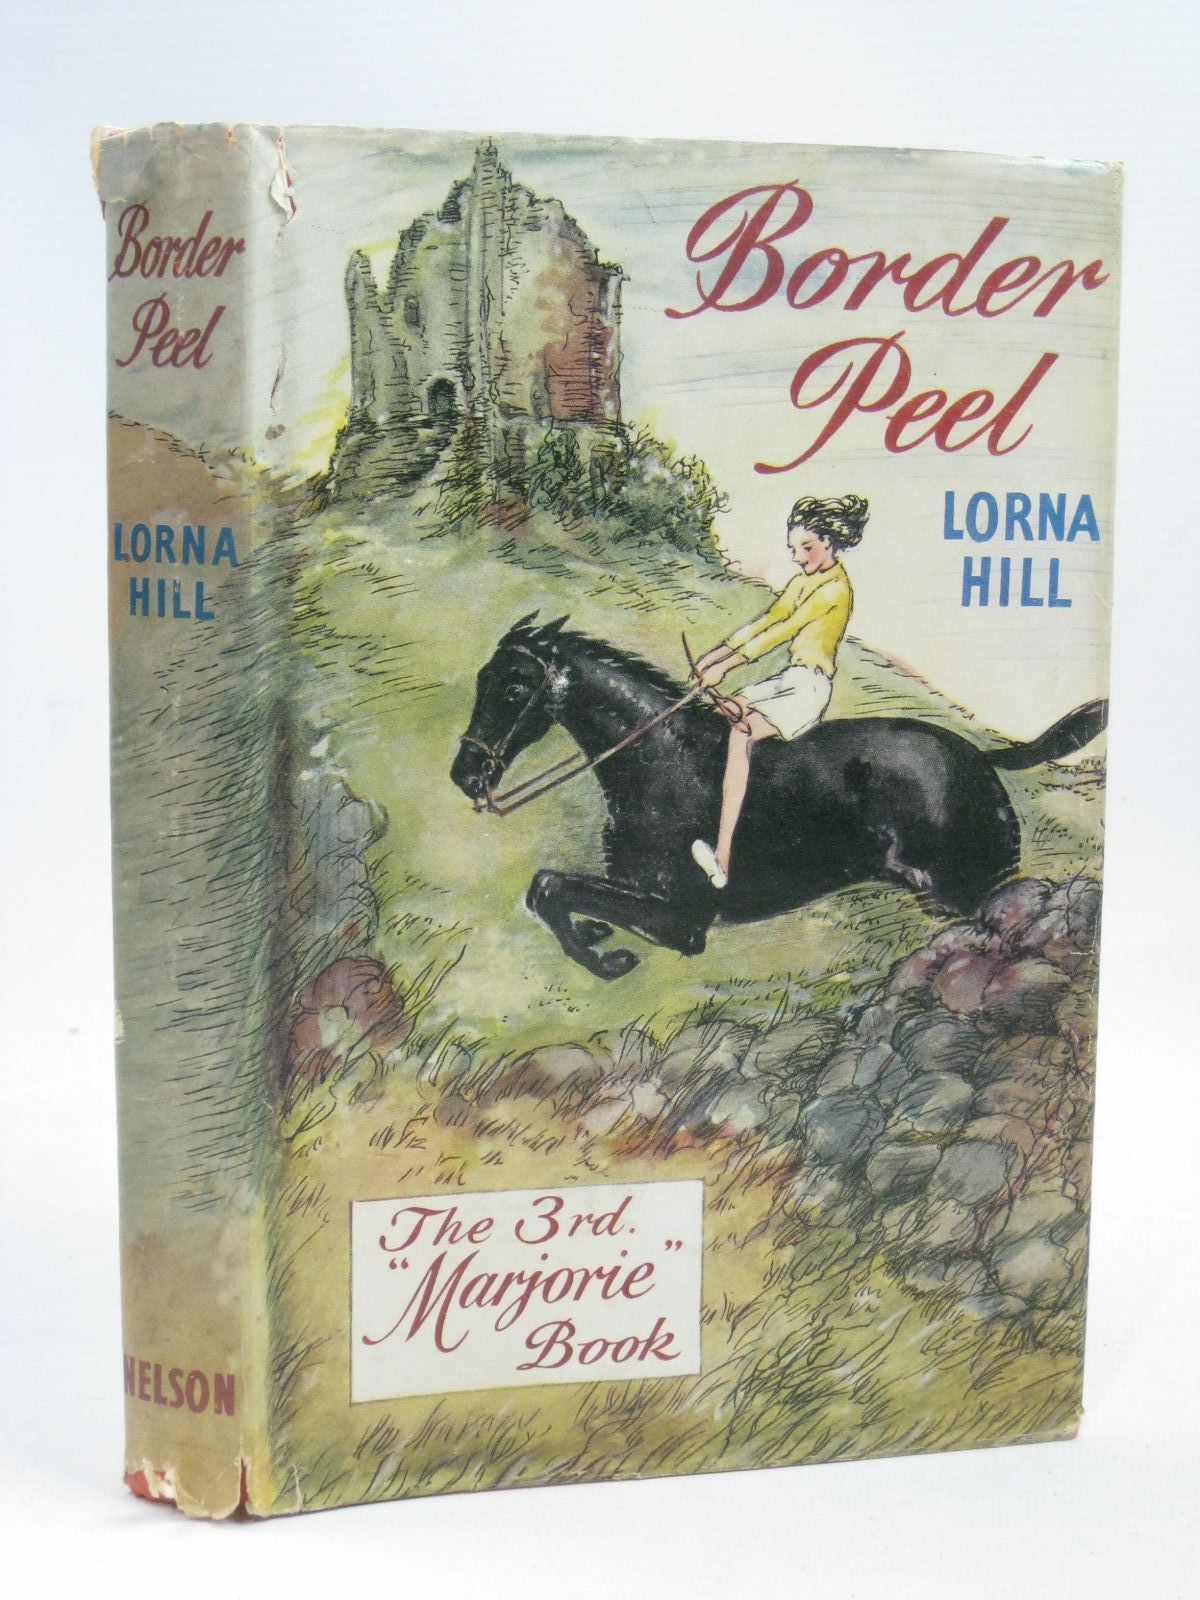 Cover of BORDER PEEL by Lorna Hill